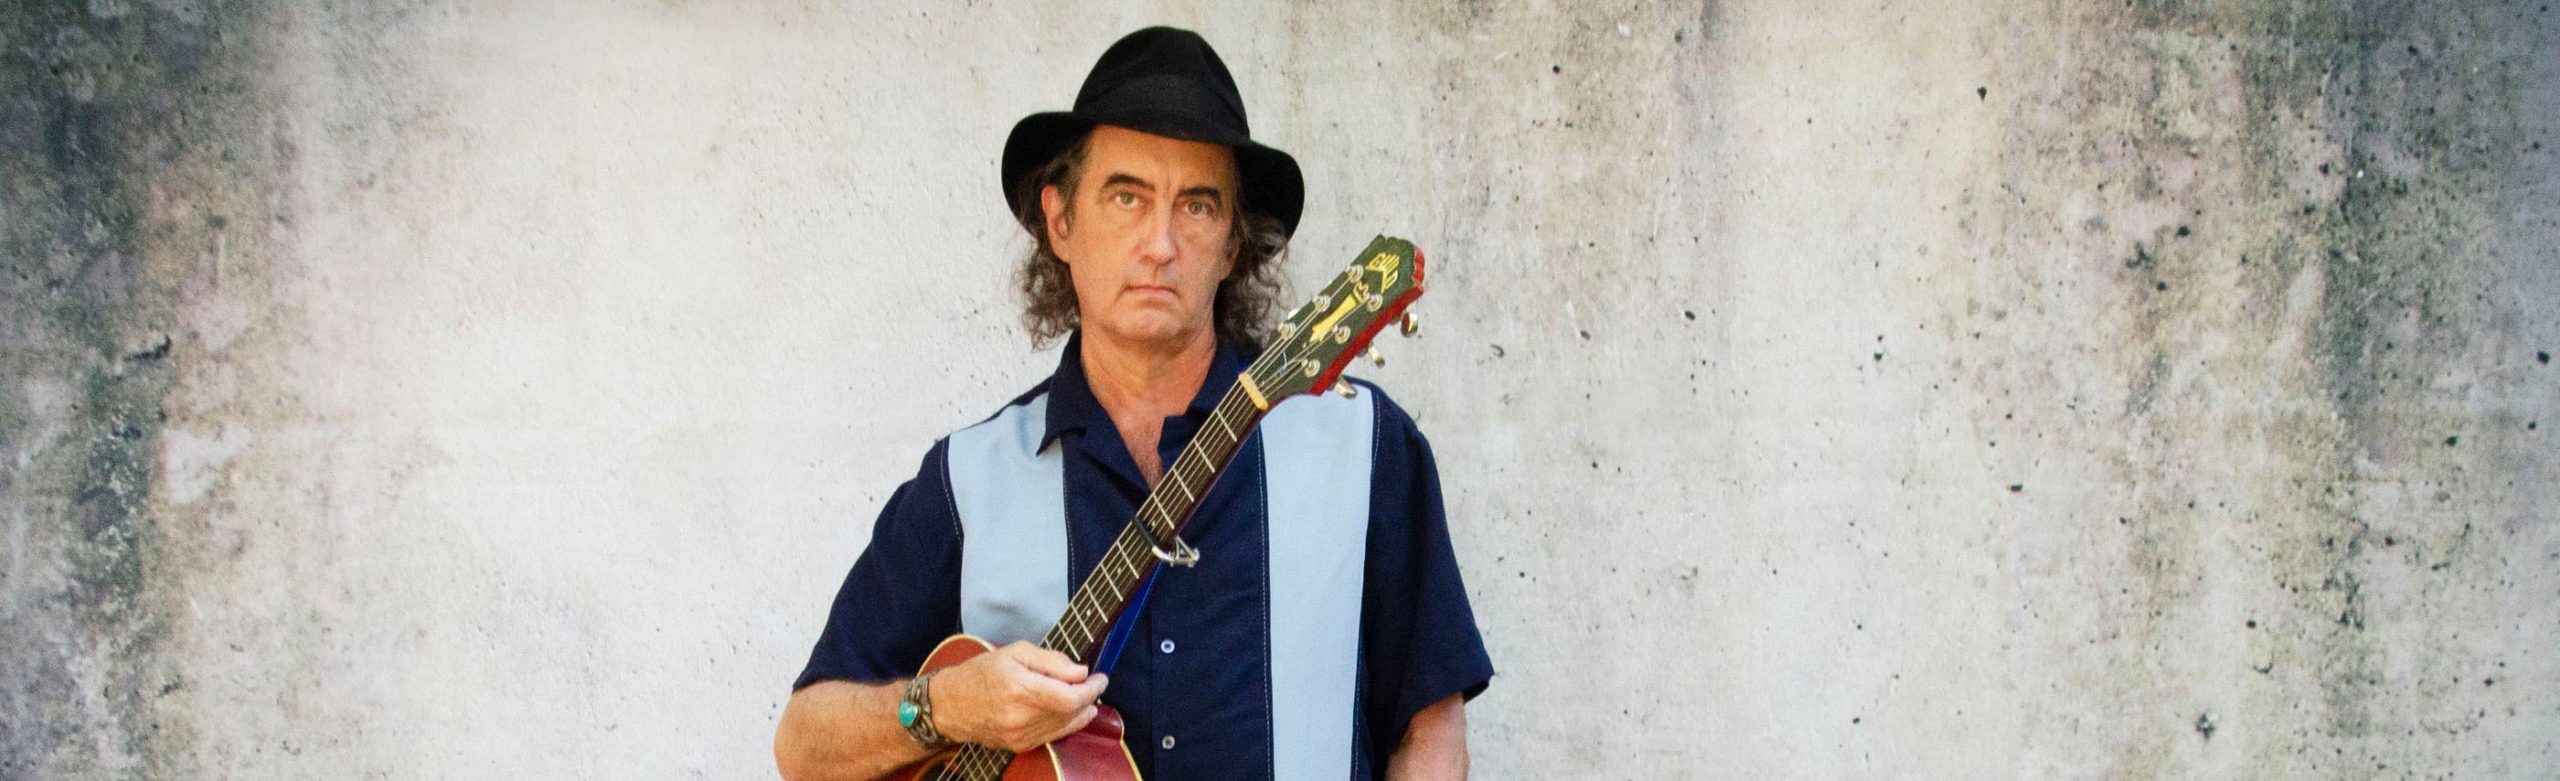 James McMurtry Tickets Giveaway 2022 Image